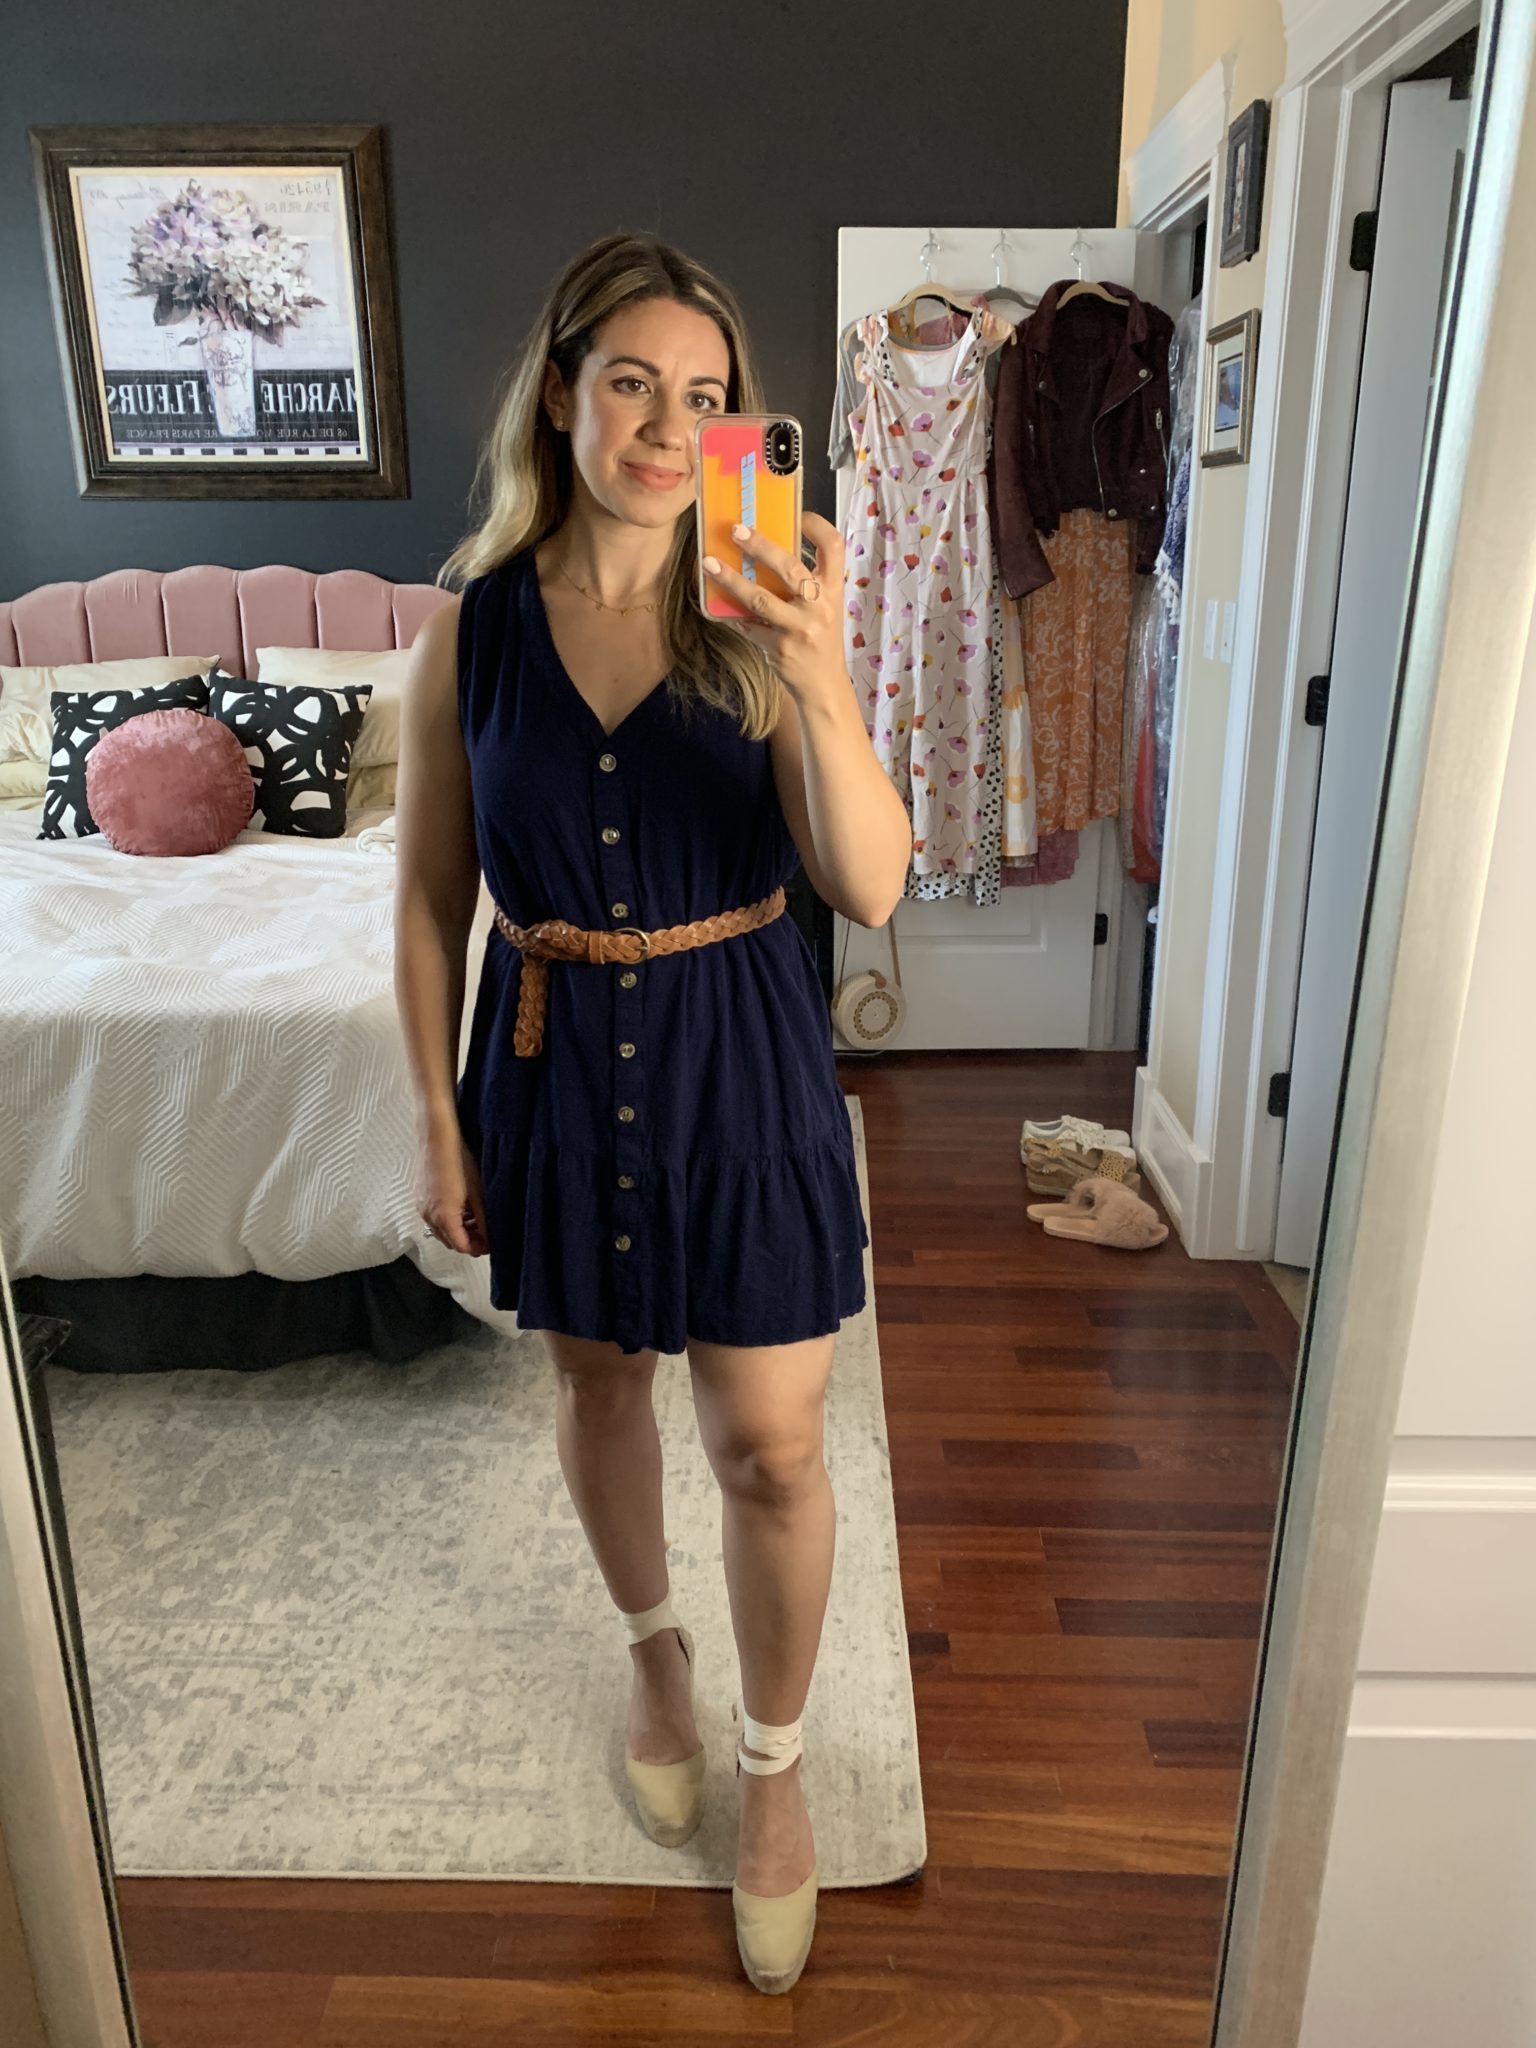 Sleeveless Dress by popular Chicago fashion blog, Glass of Glam: image of a woman standing in her bedroom and wearing a Amazon Imysty Womens Polka Dot V Neck Button Down Ruffles Loose Mini Short T-Shirt Dress, ShopBop Castaner Carina Wedge Espadrilles, and a Gap Braided Belt.